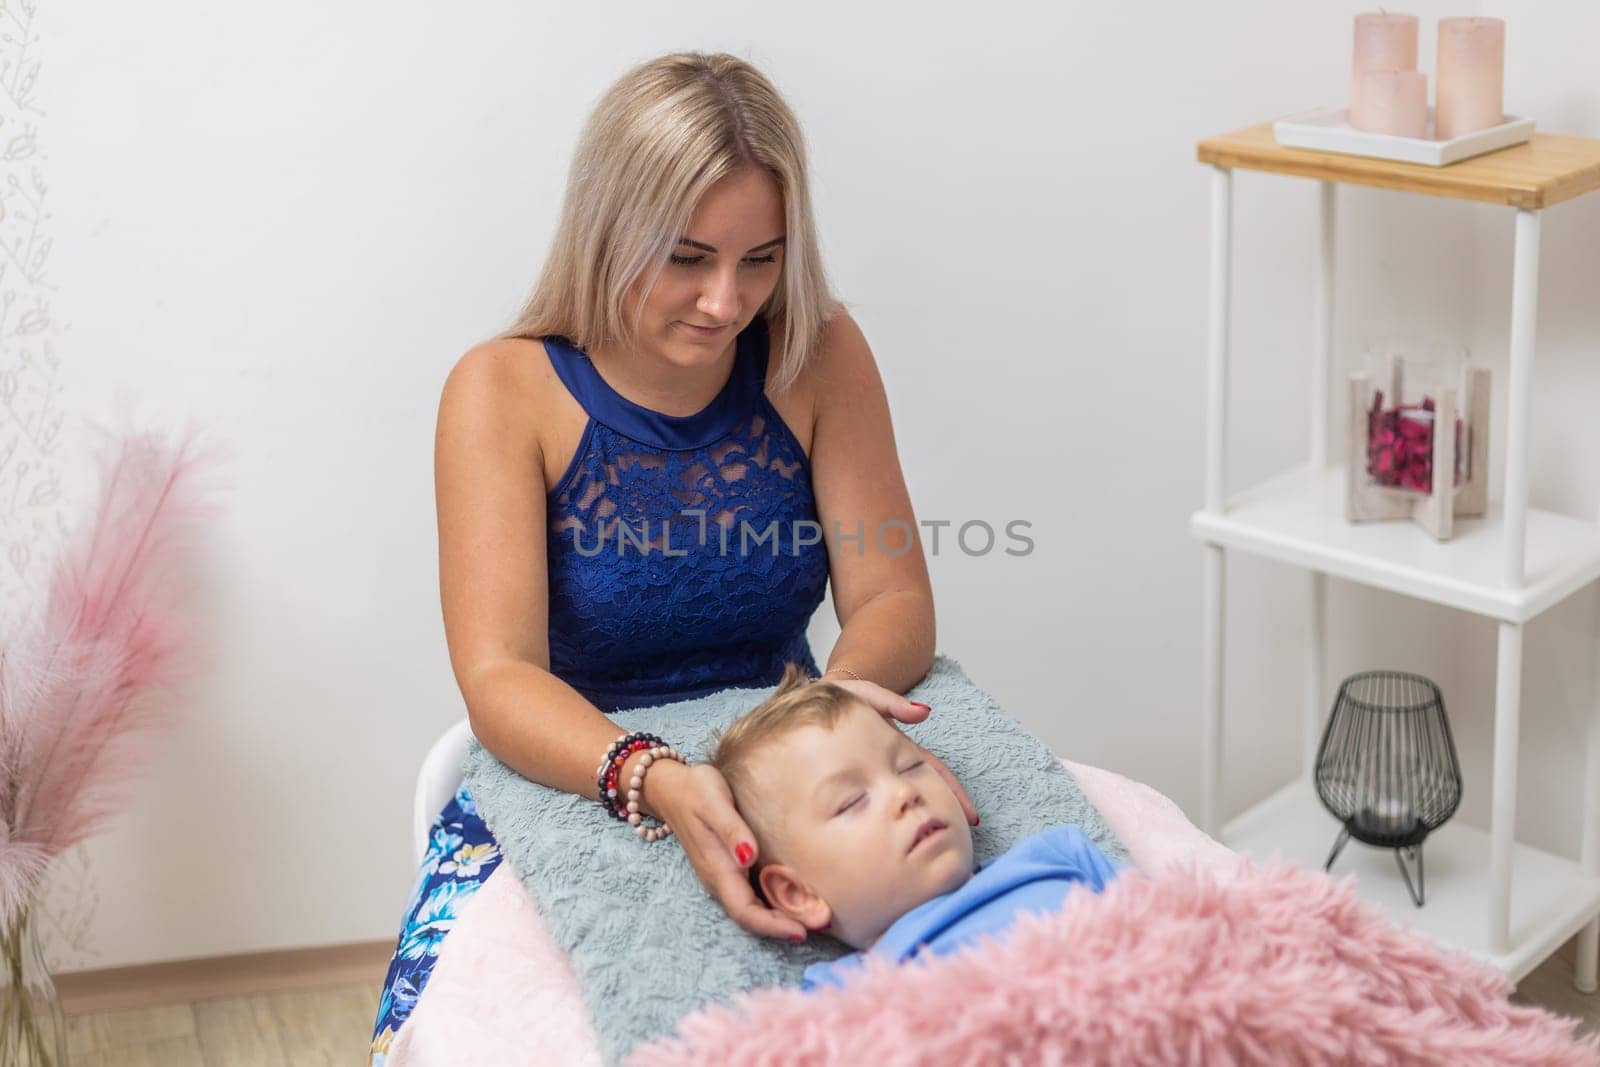 Process of access or consciousness bars therapy, woman healing an young boy by method of 32 points on the head that we touch lightly in certain combinations, alternative medicine